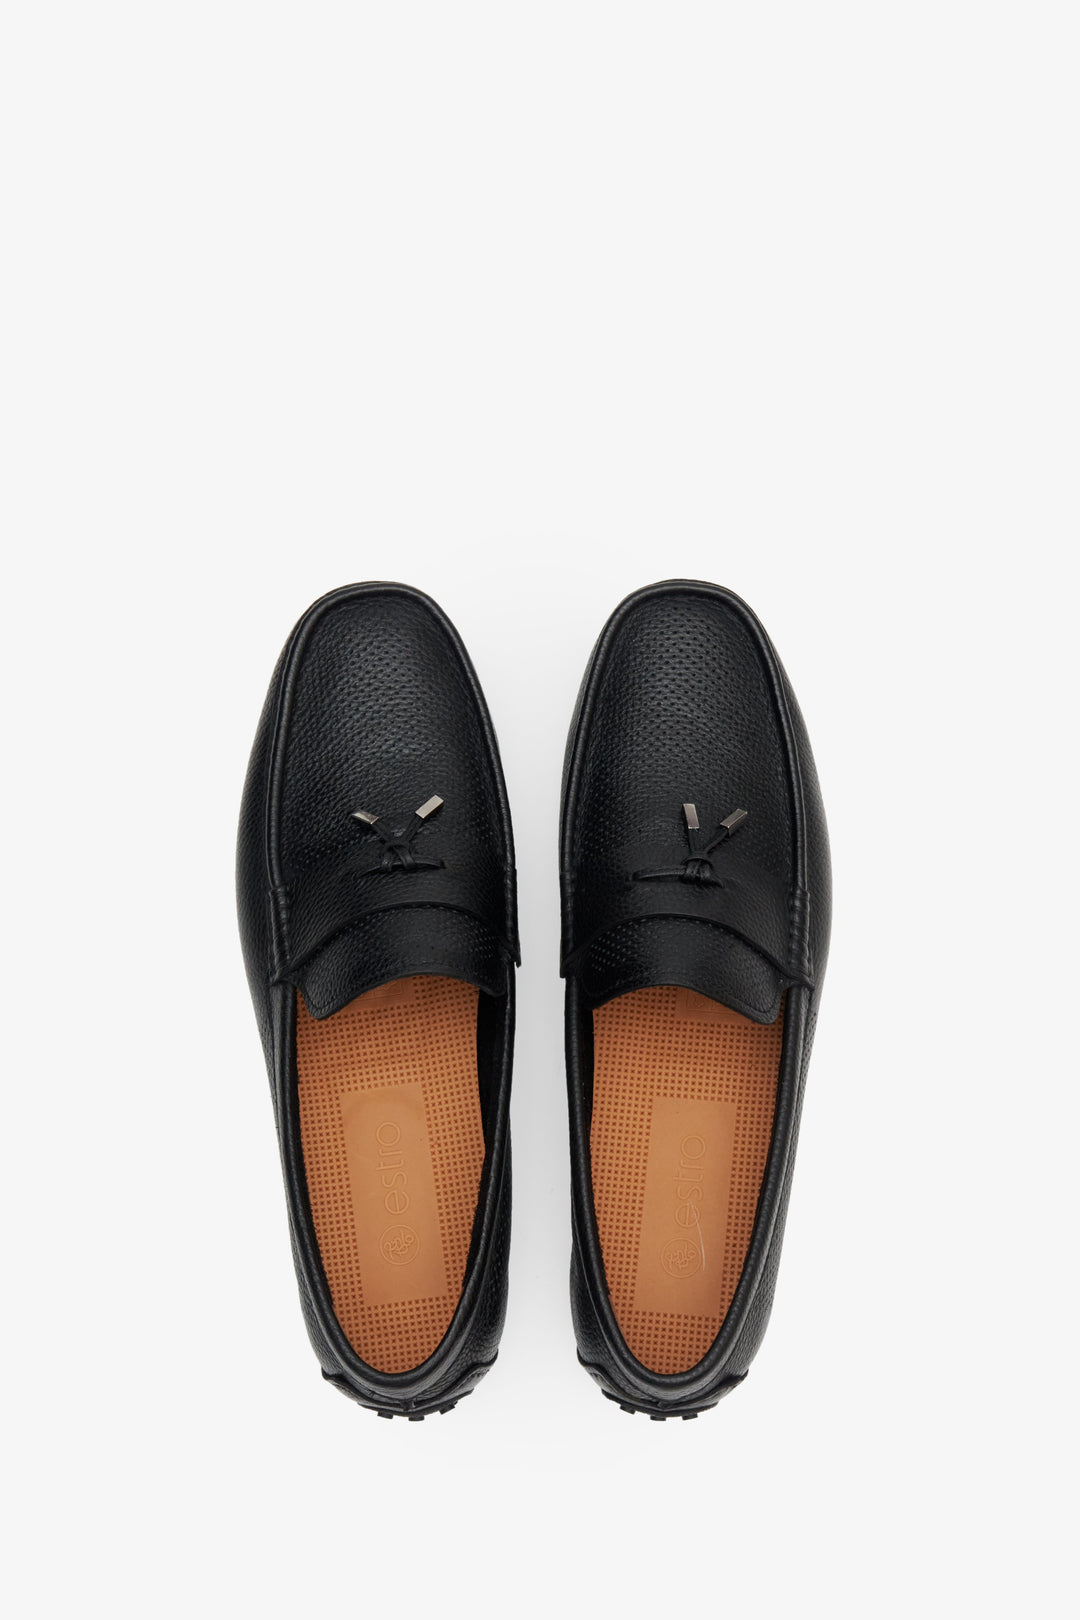 Men's black leather loafers by Estro - top view shoe presentation.